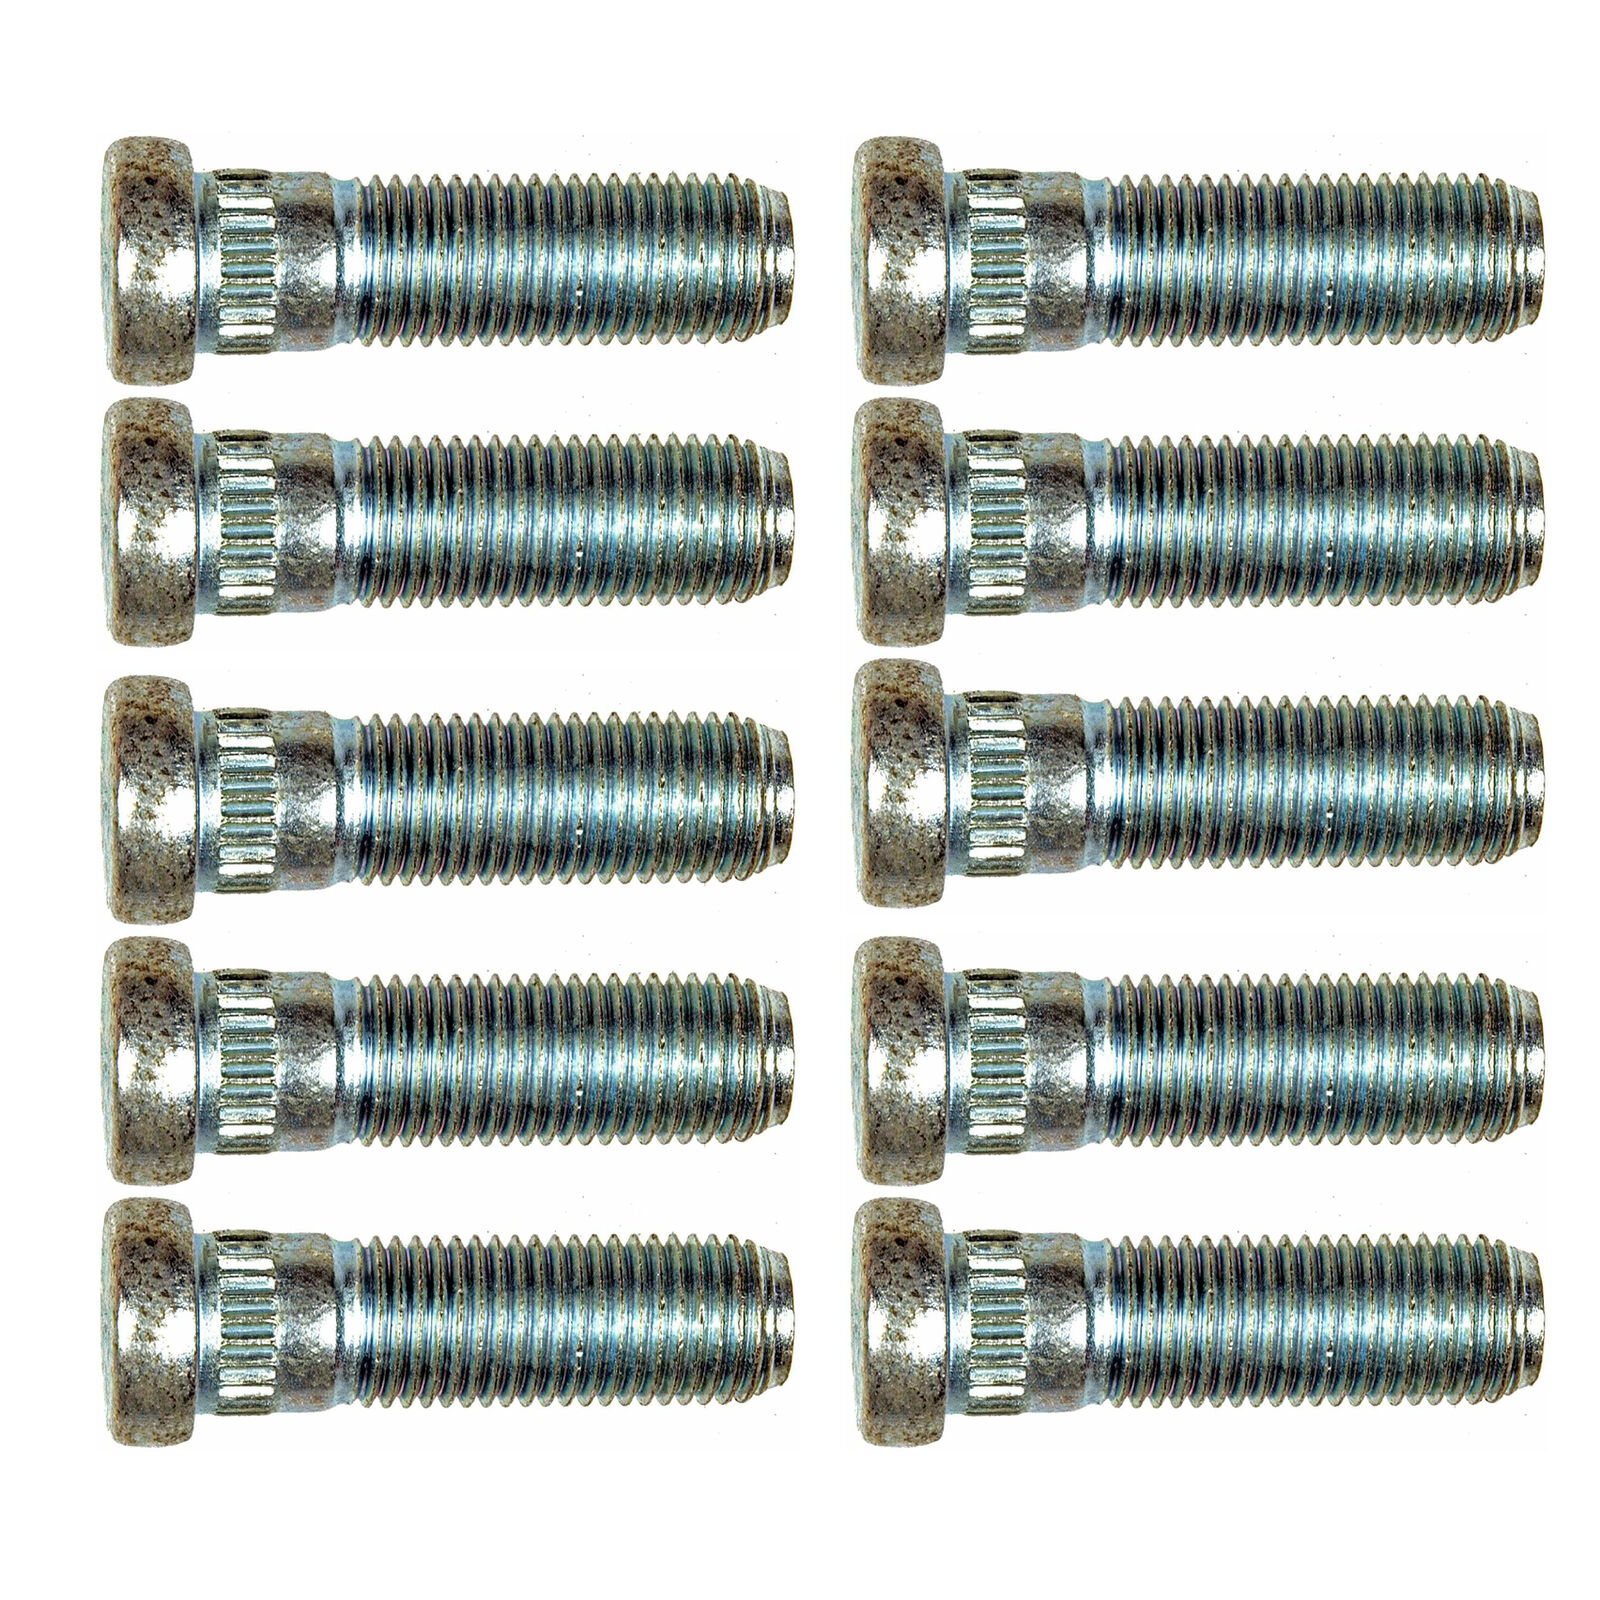 Dorman 7/16-20 Wheel Studs Set of 10 Front or Rear for Chevy Suburban Camaro